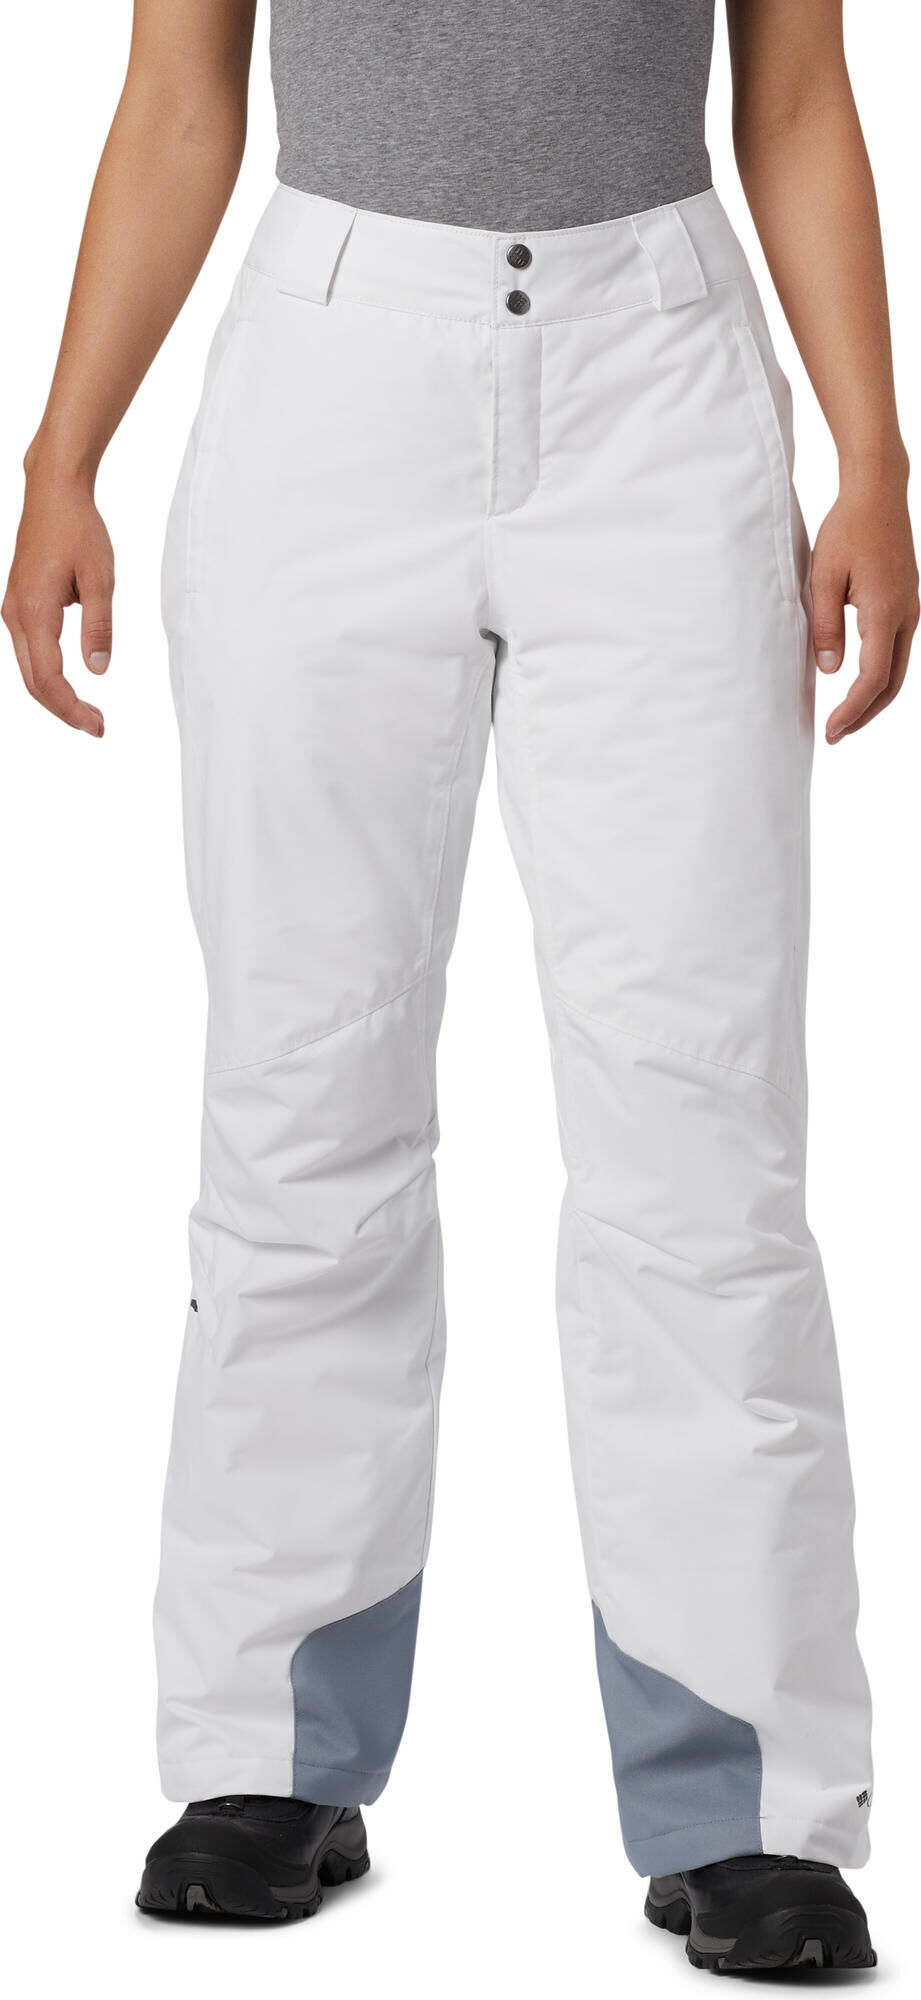 Columbia Bugaboo™ OH Pant white (101) S Short